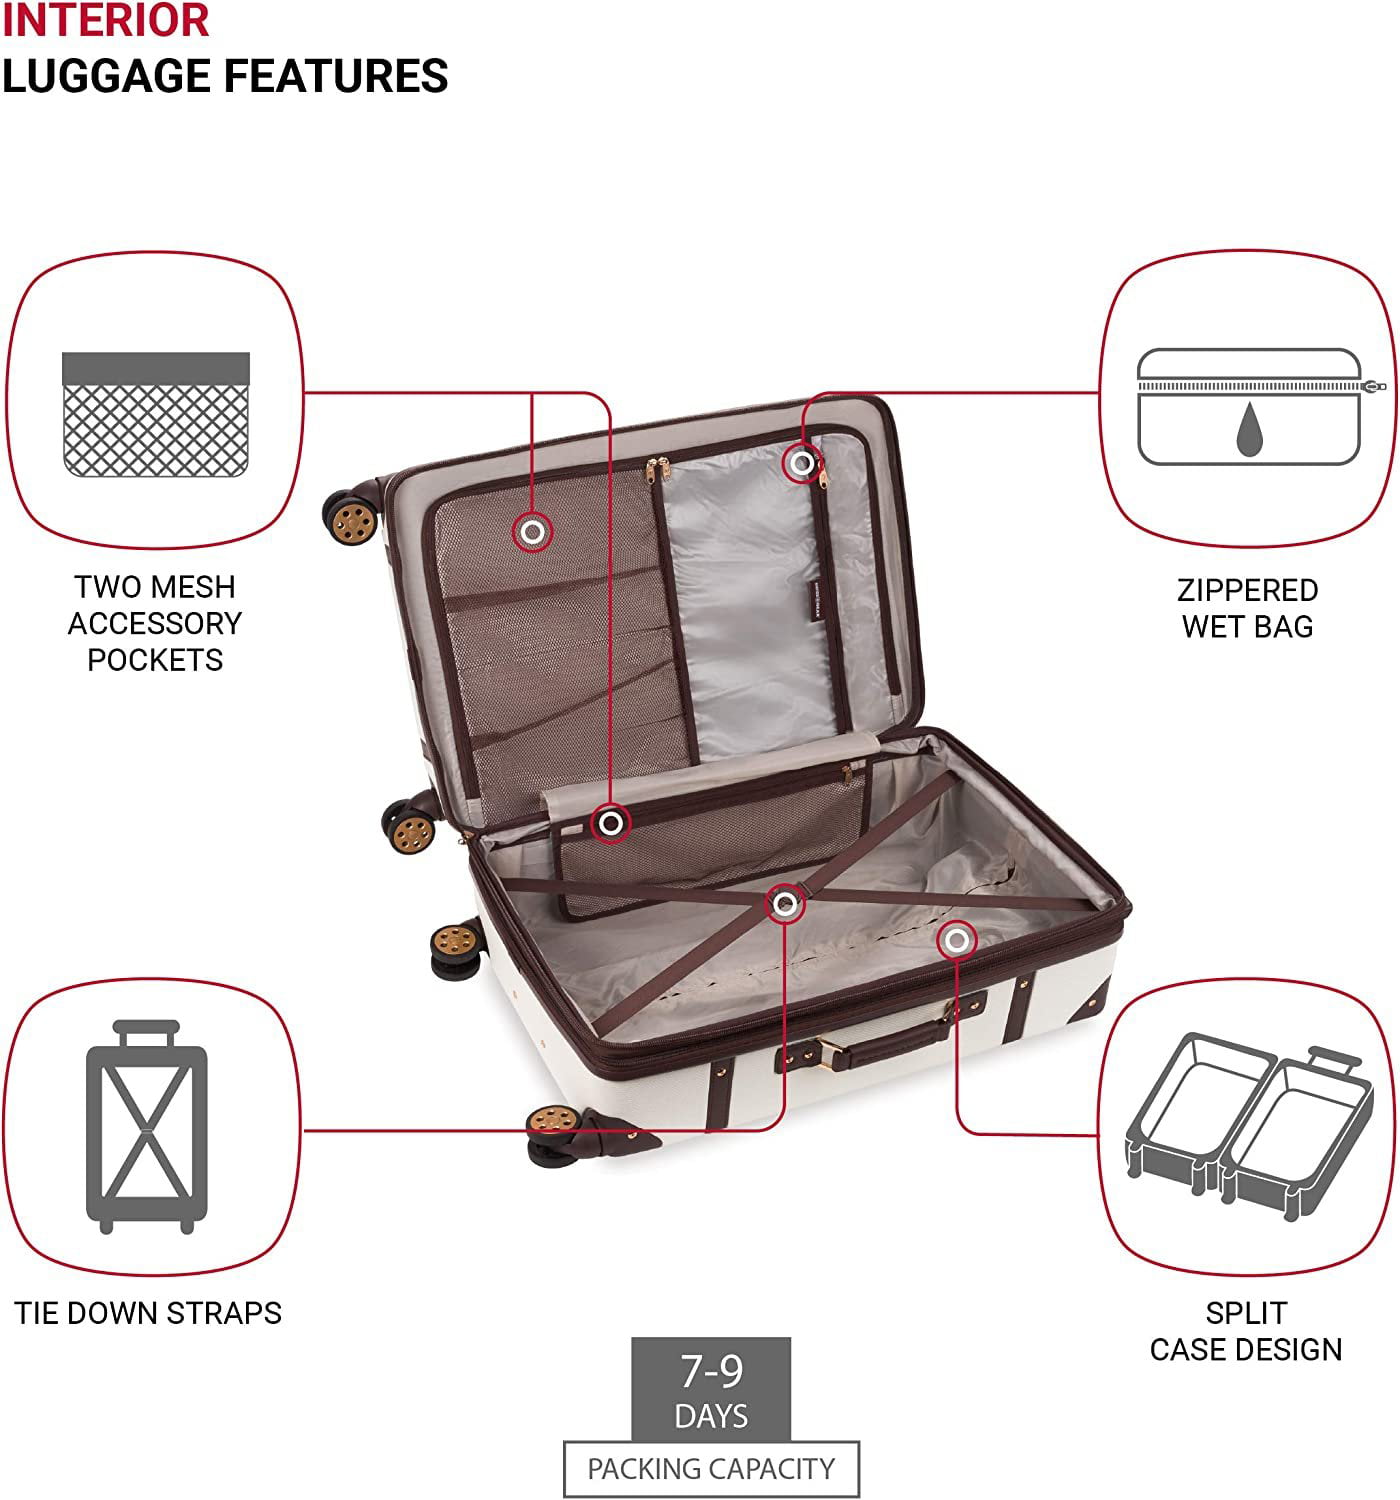 SwissGear 7739 Hardside Luggage Trunk with Spinner Wheels, White